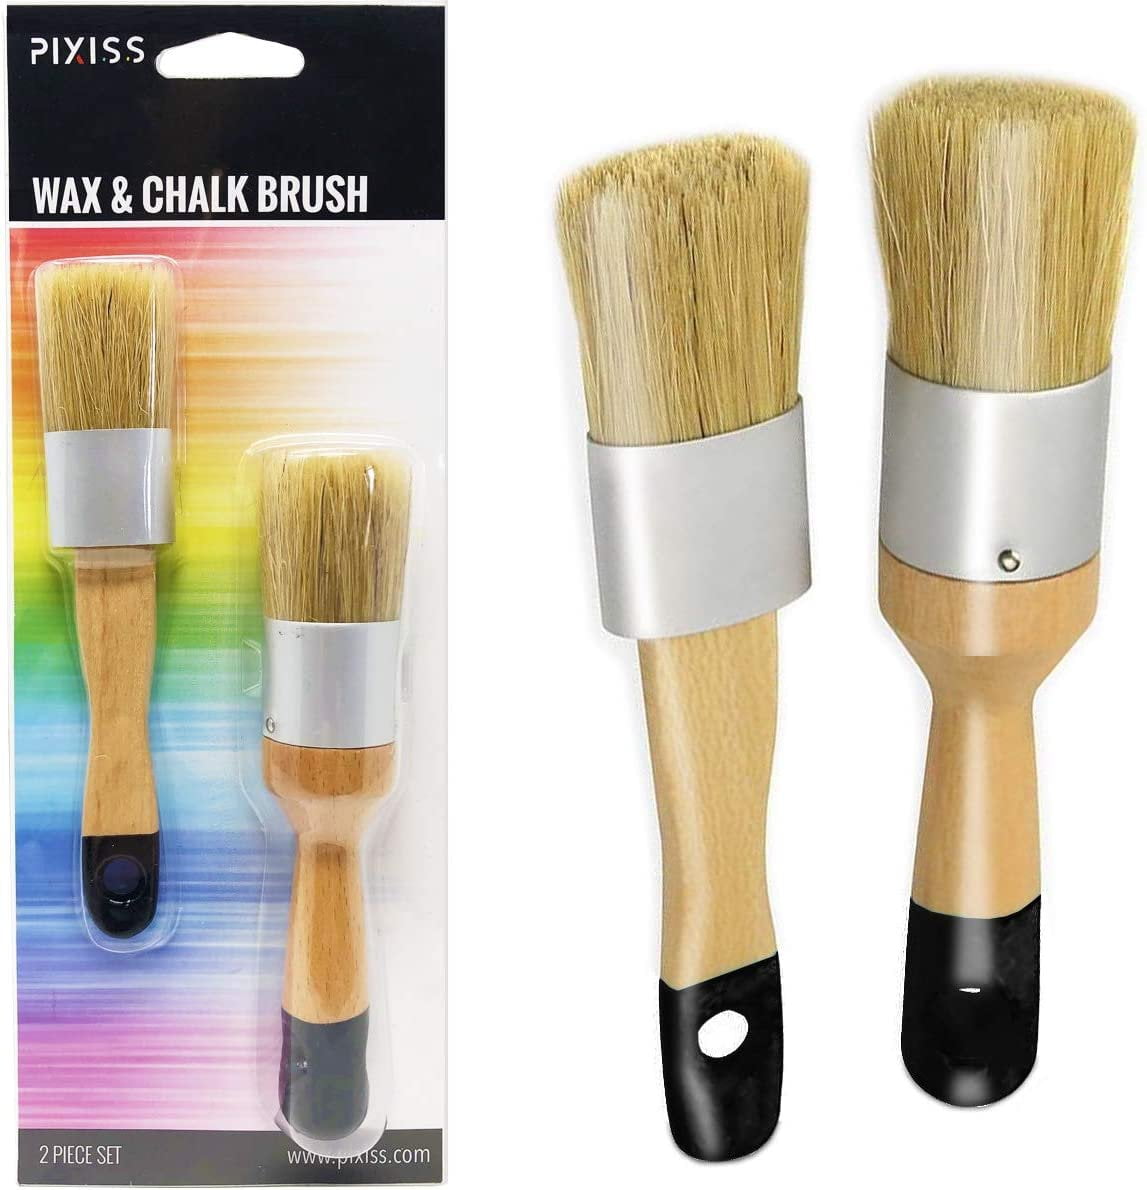 Professional Chalk and Wax Paint Brush Set, 3pcs Small Round Reusable  Natural Bristle Brushes for Folk Art Home Decor DIY Painting Stencils,  Compatible with Annie Sloan Chalk Paint Milk Paint